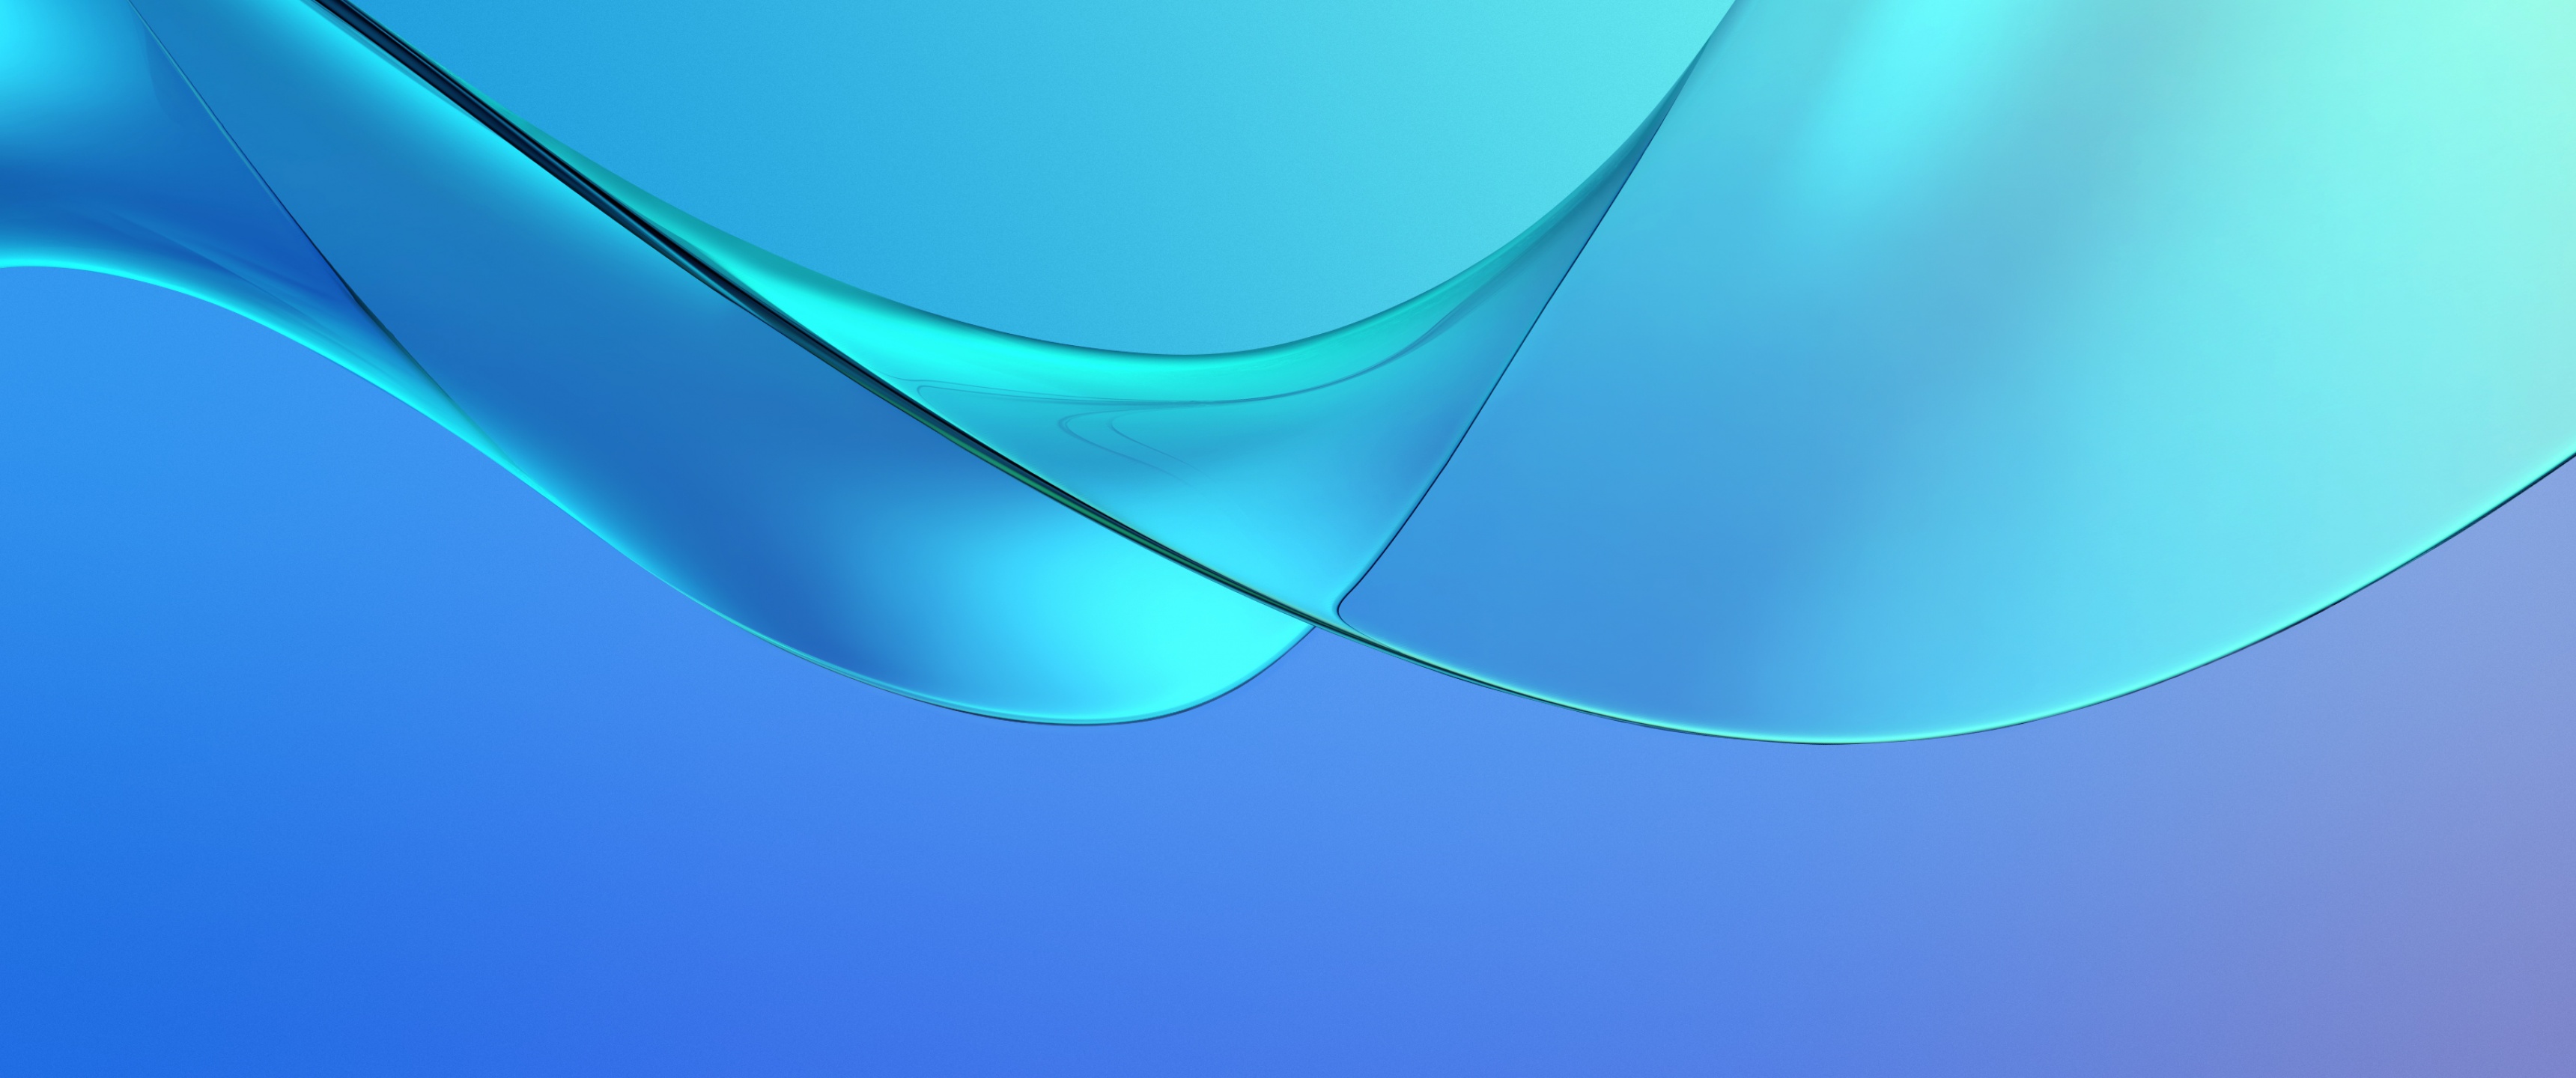 Waves Wallpaper 4K, Blue, Abstract, #1166